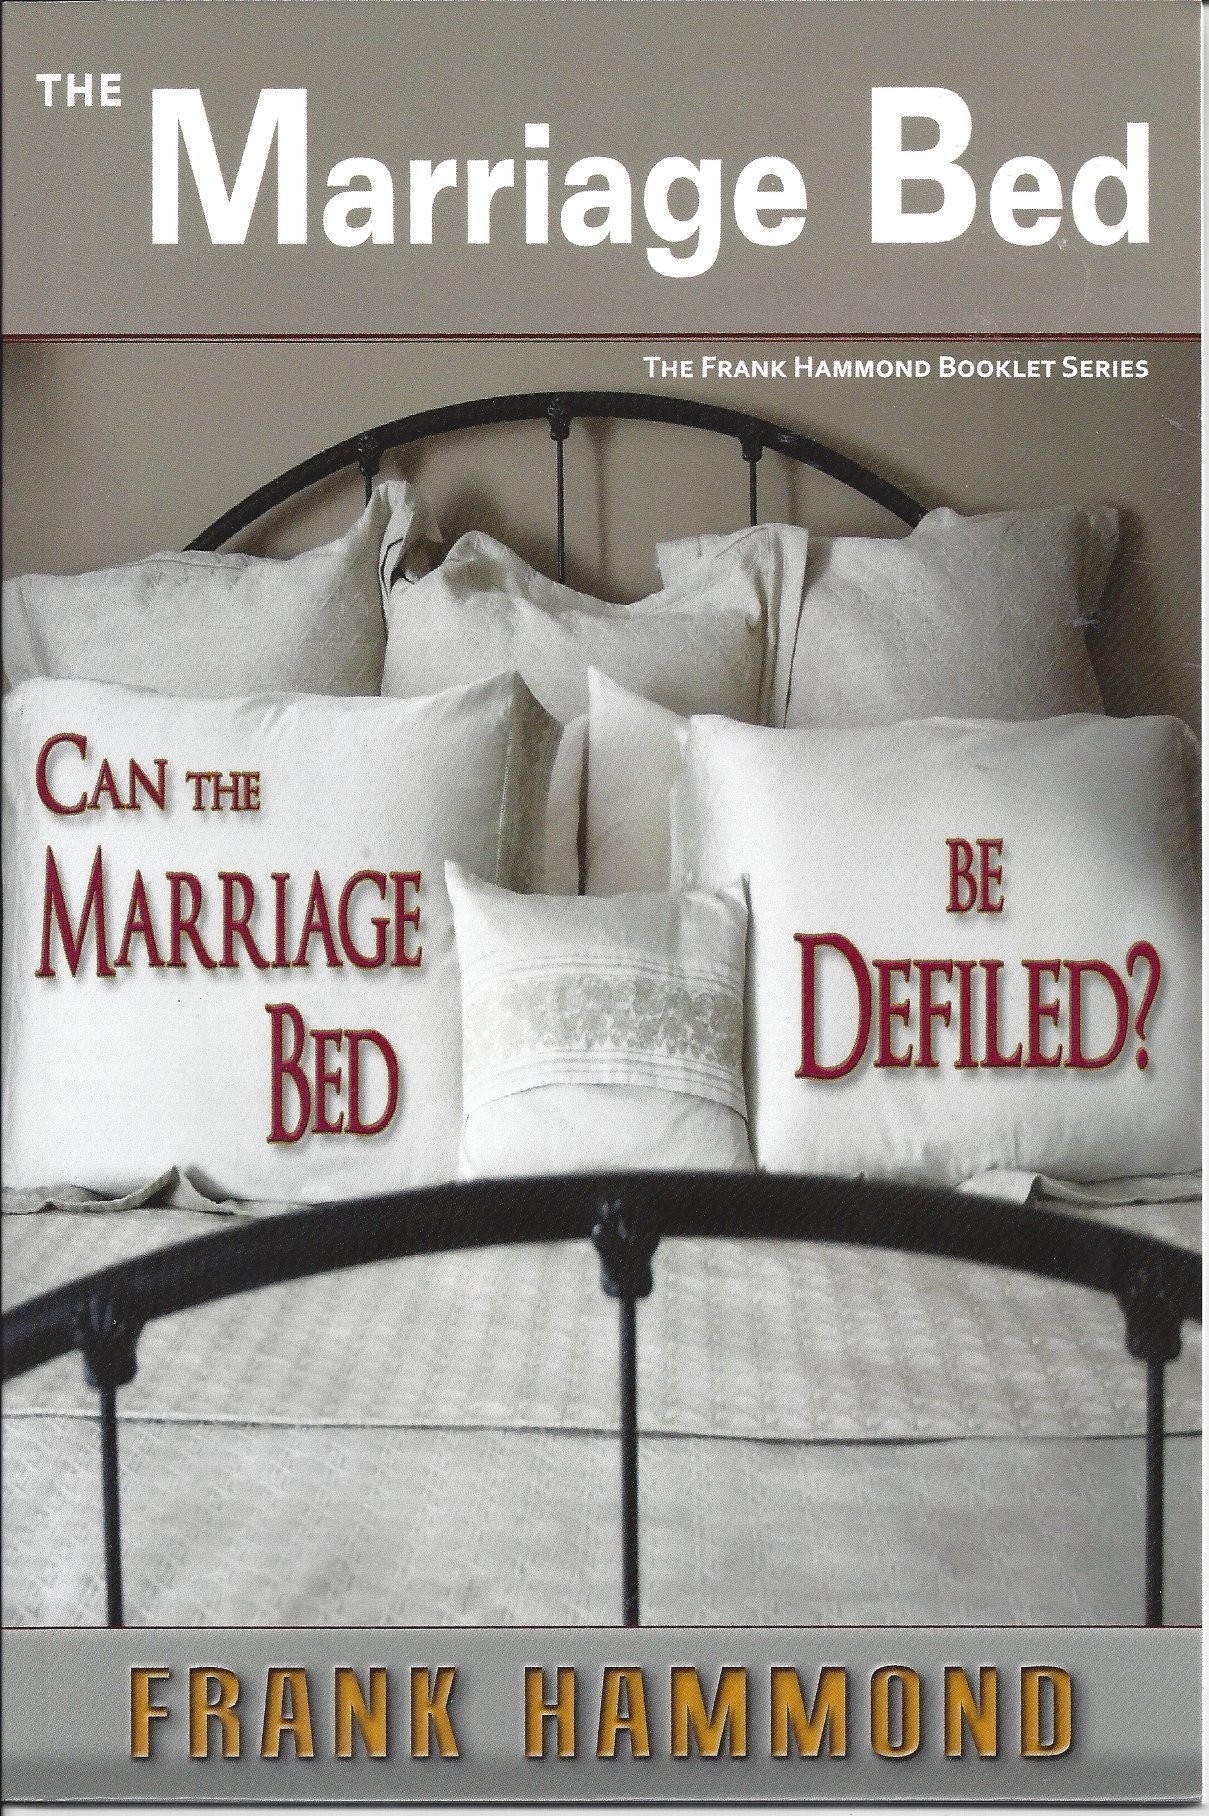 Marriage Bed front